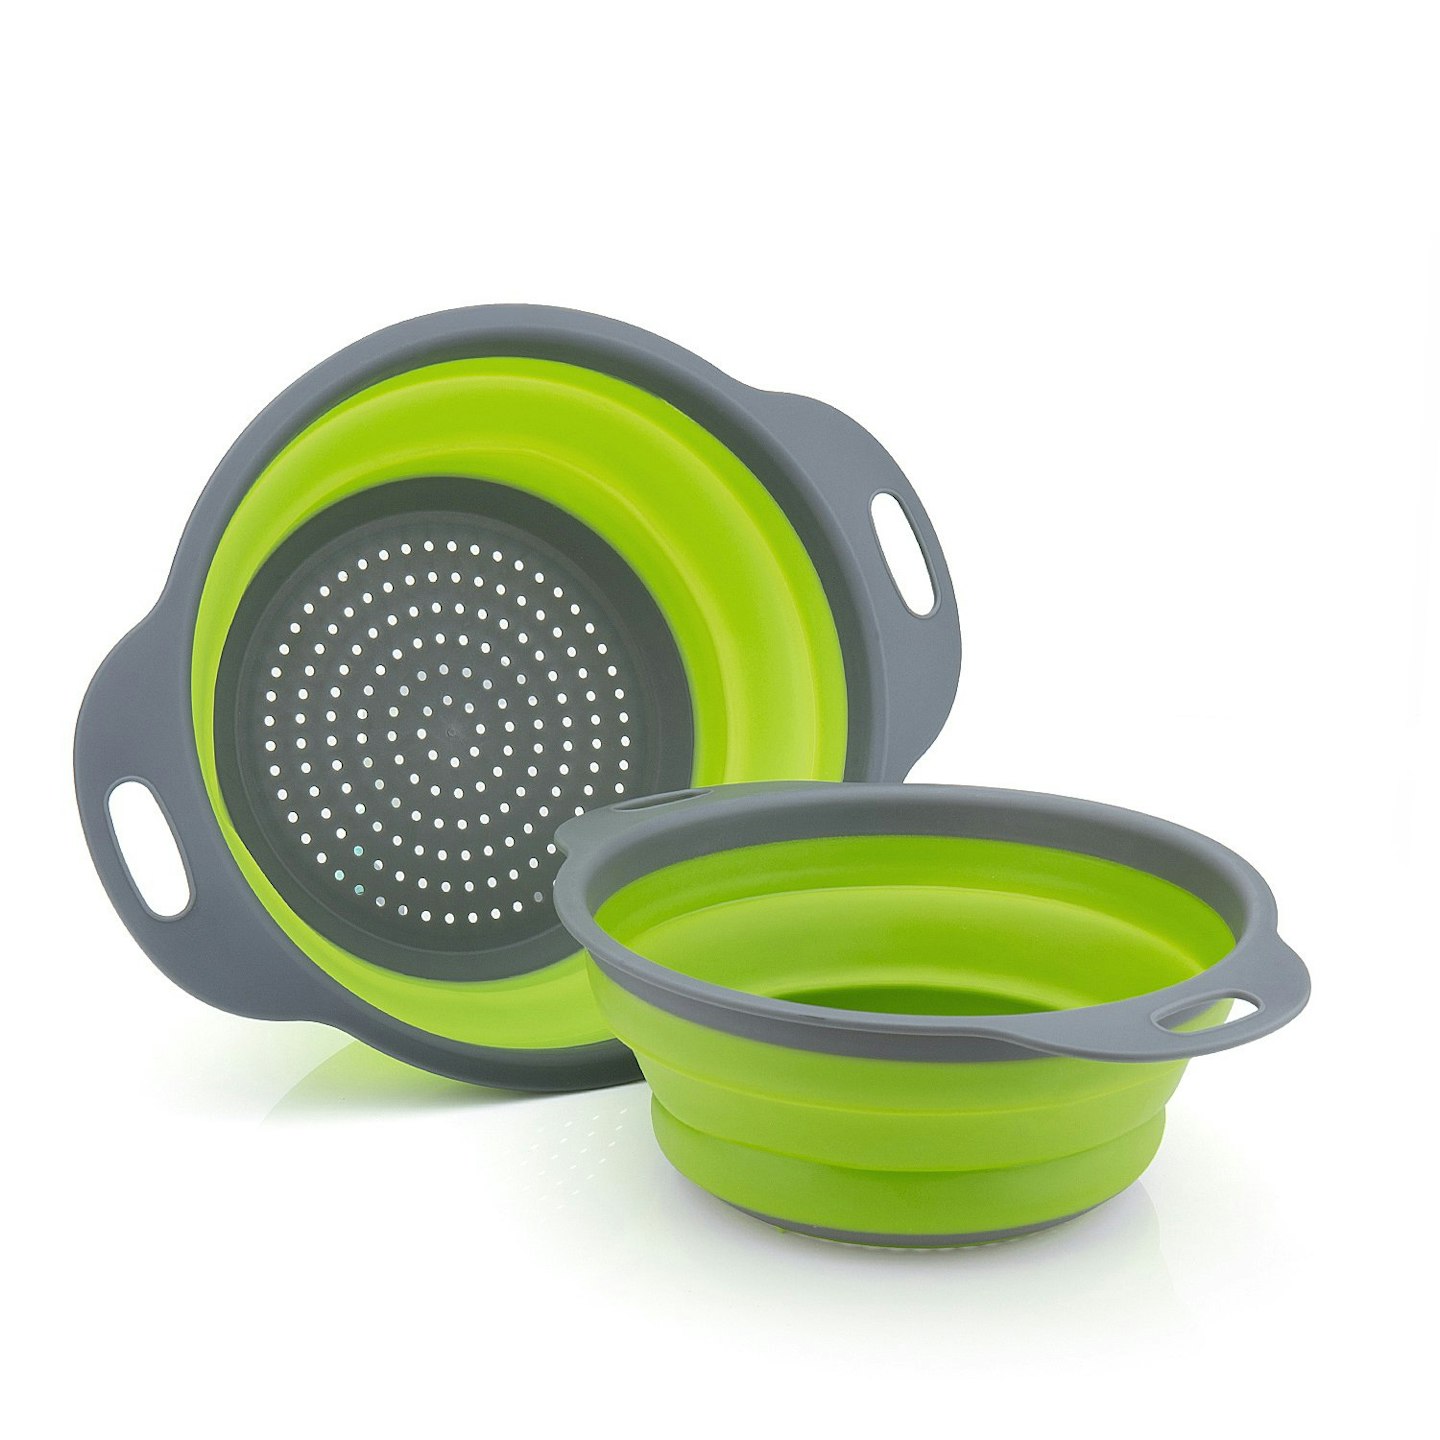 Diealles collapsible food strainers